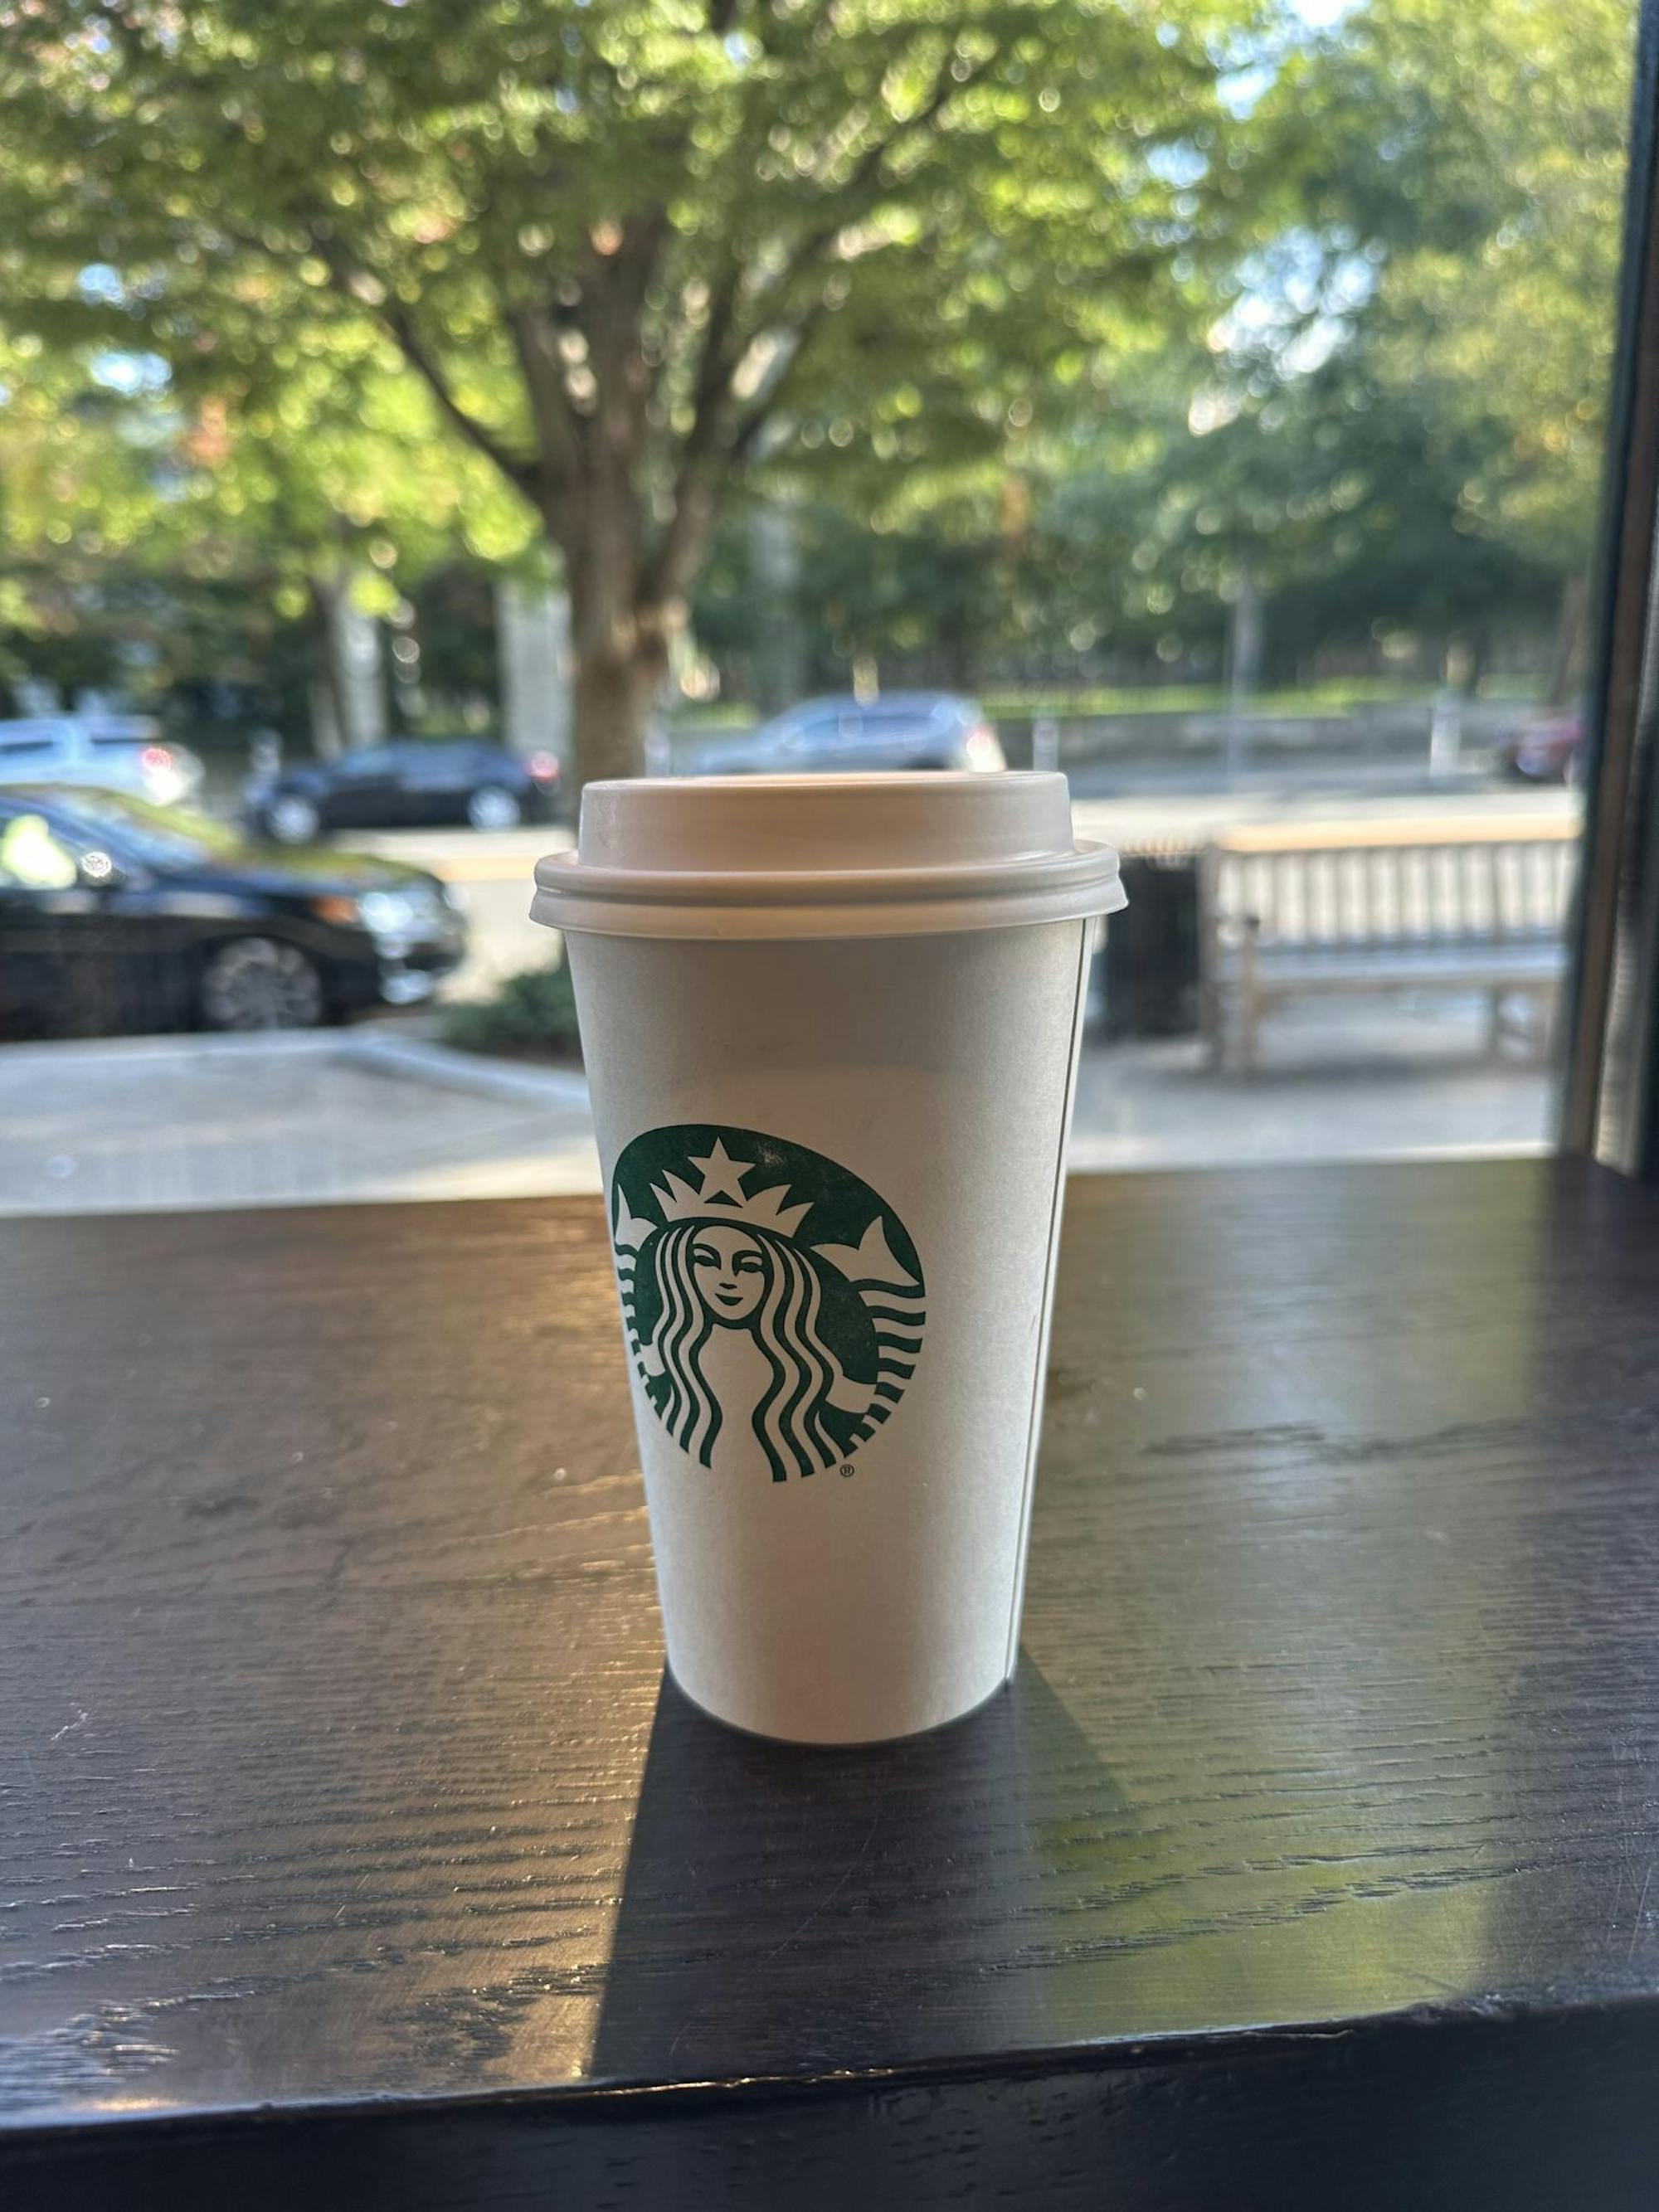 A white cup with a green mermaid logo.